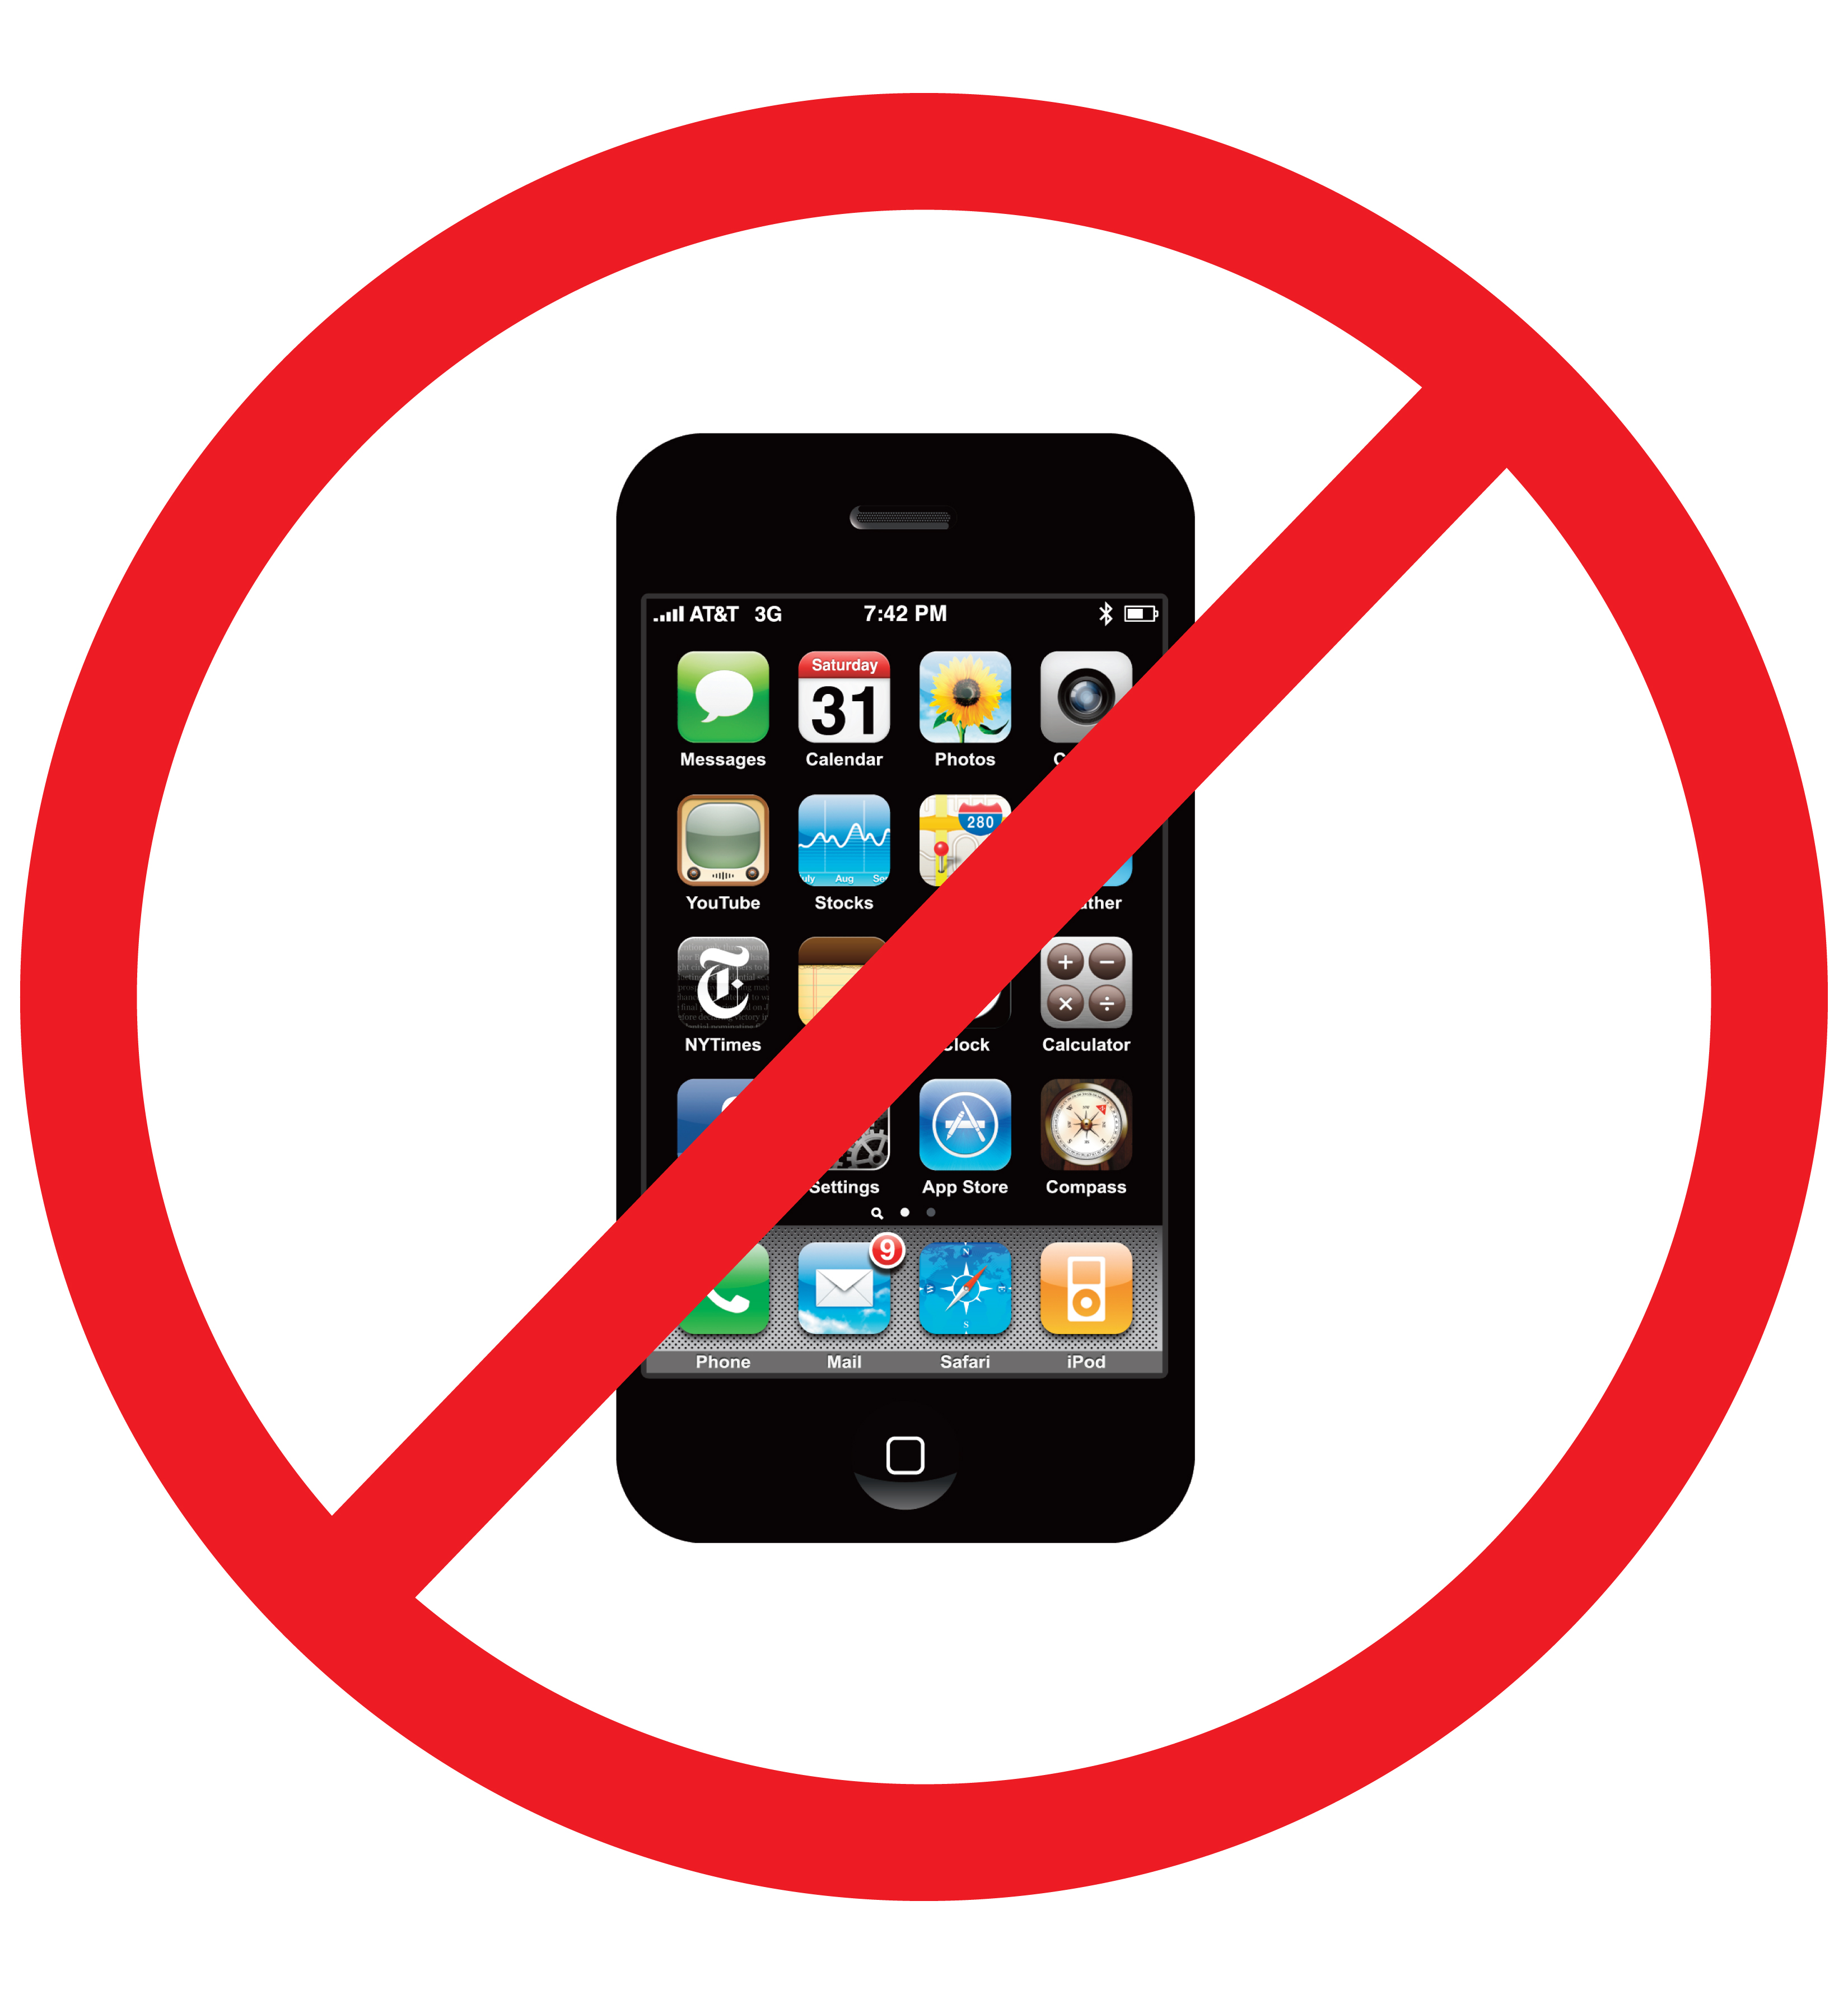 no cell phone clipart